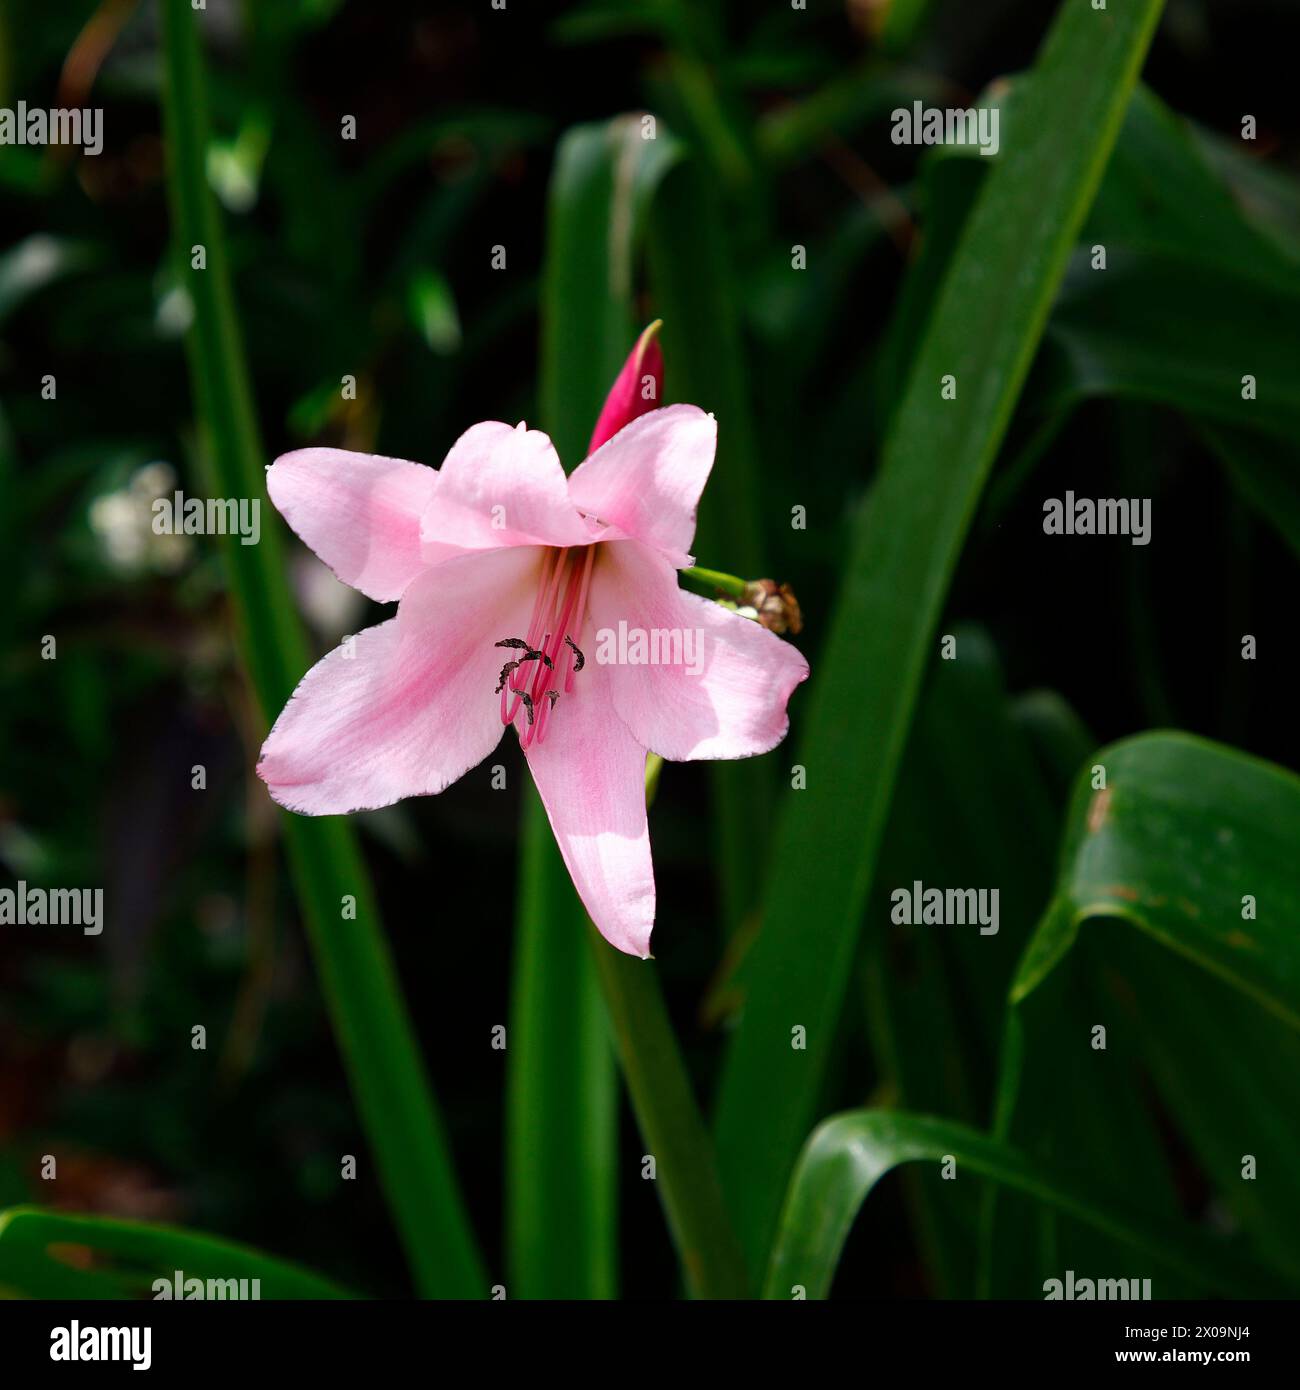 Closeup of the pink flower of the tender flowering garden plant bulb Crinum cape dawn. Stock Photo